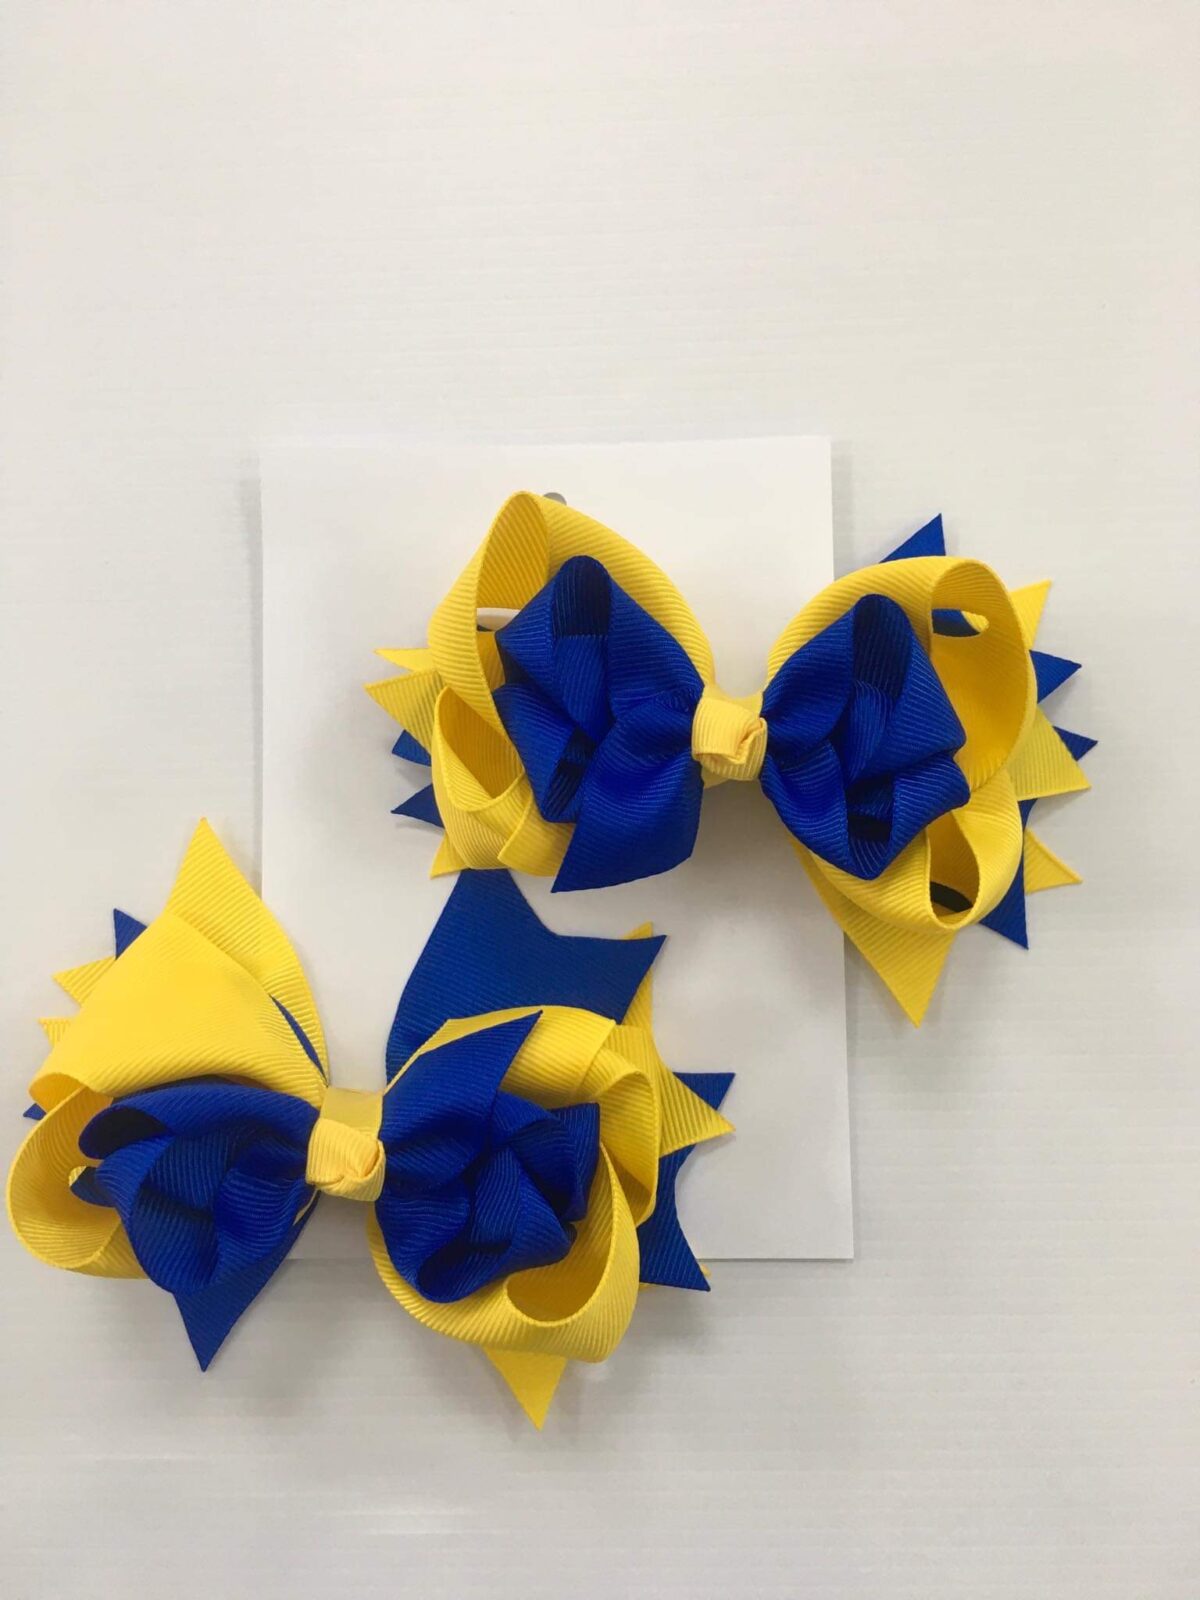 Cheer Bows Archives : Bowdabra